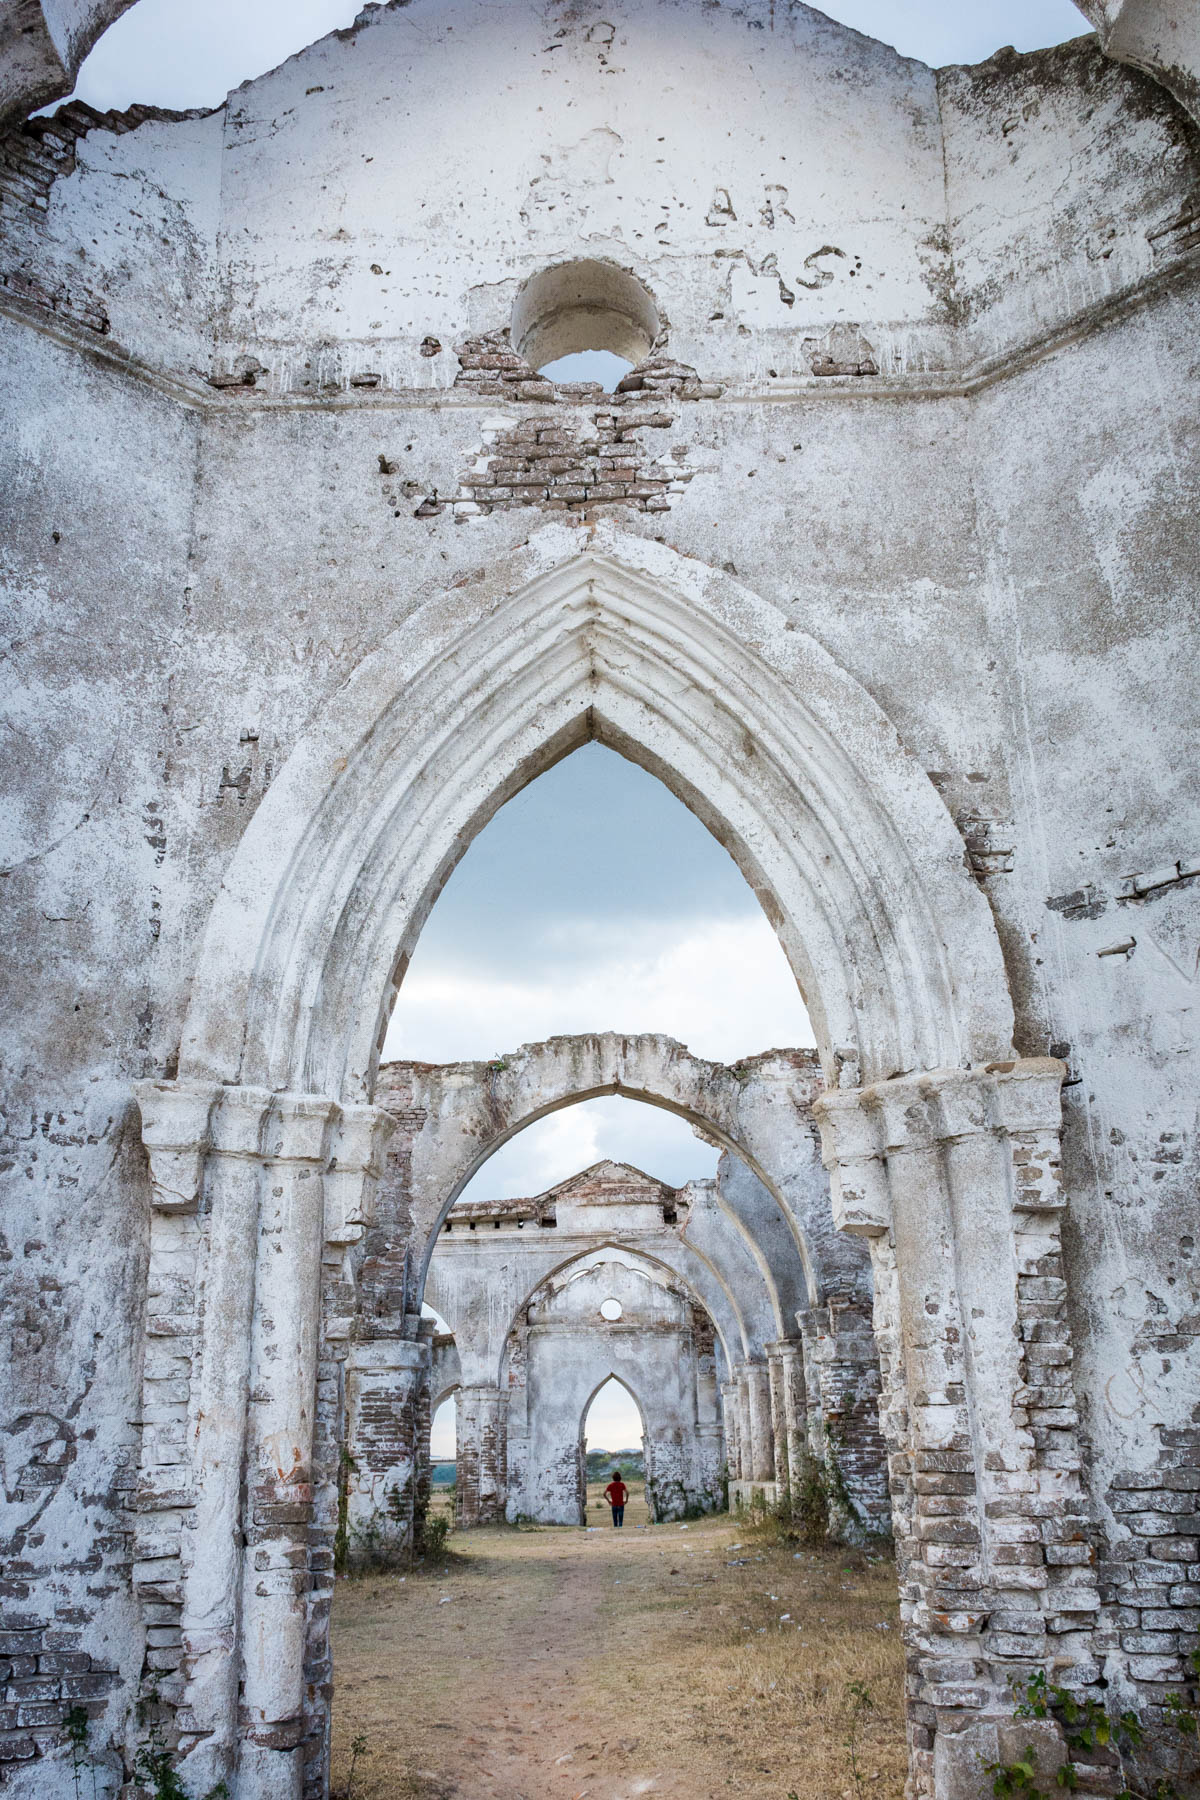 The ruins of Shettihalli Church in Karnataka, India, also known as the "floating church", are a great off the beaten track destination to day trip to. Read on to learn how to get to Shettihalli Church in Karnataka, India.